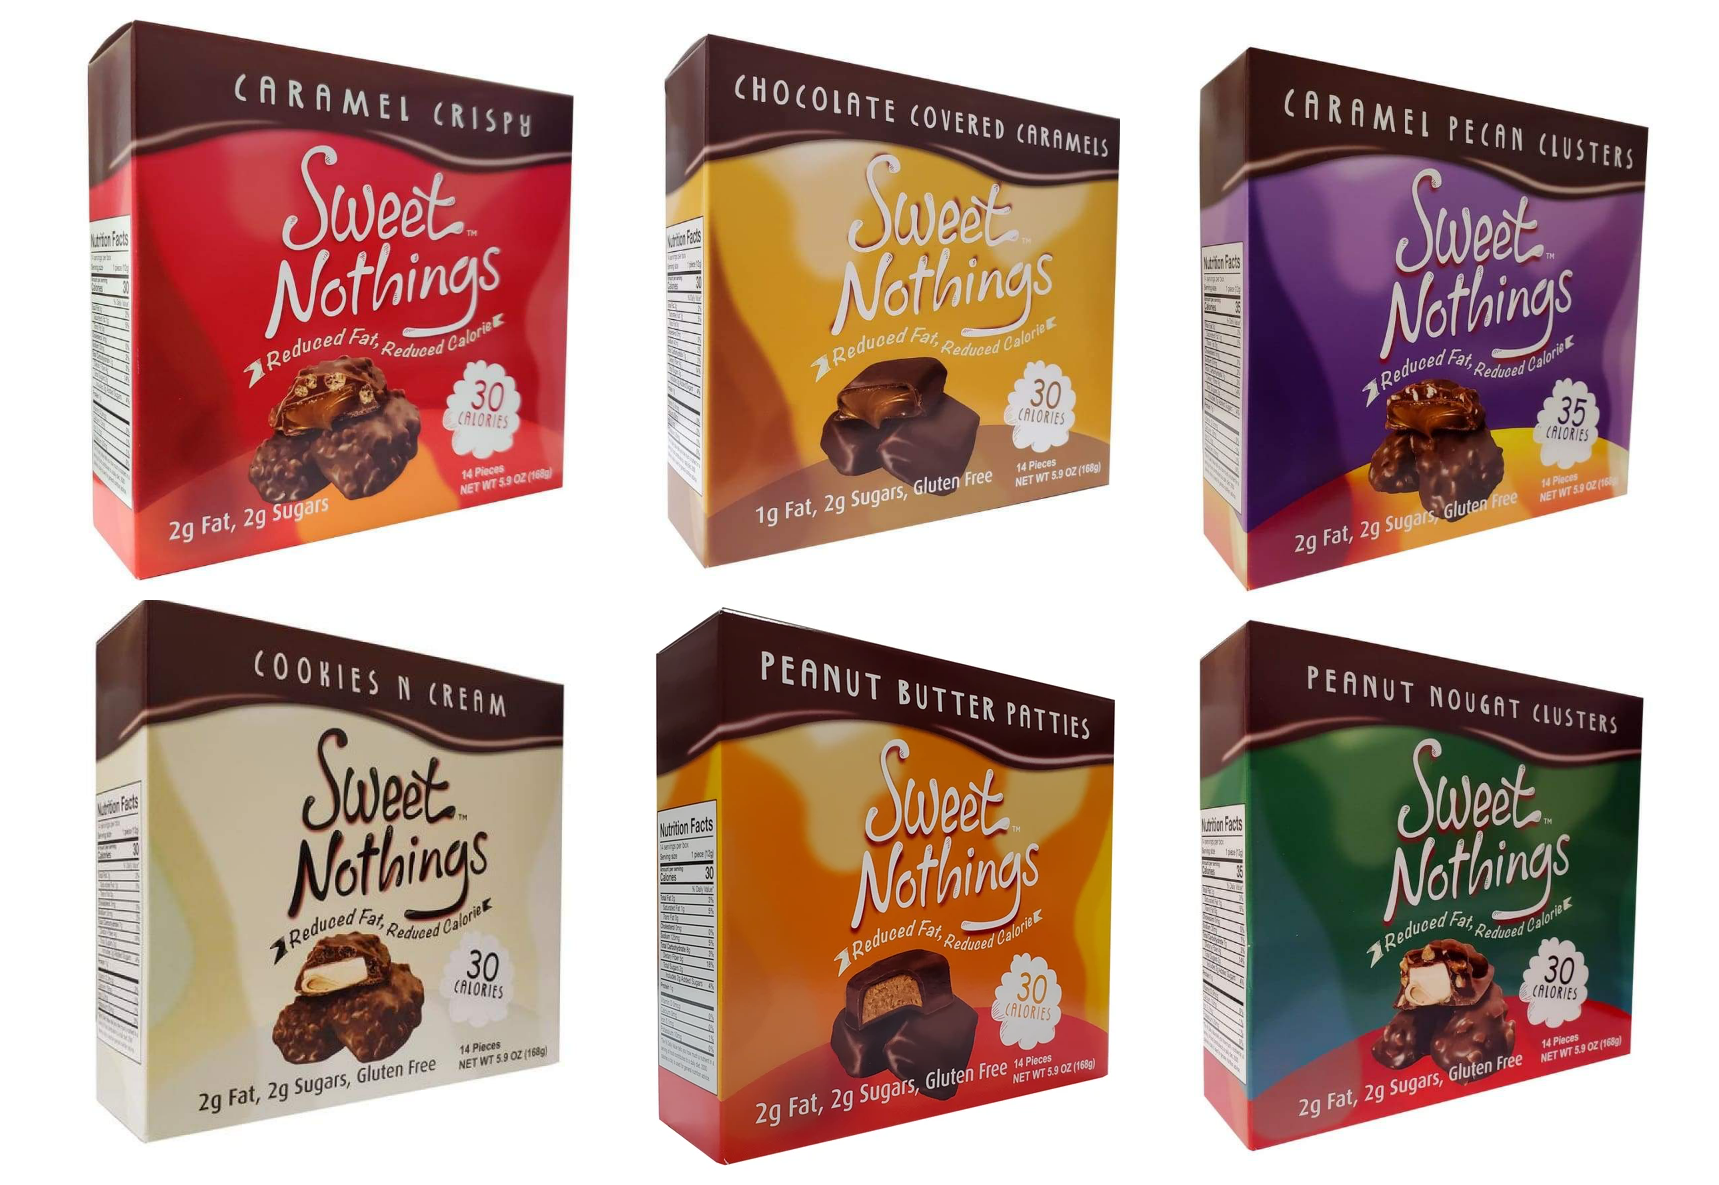 HealthSmart Sweet Nothings Chocolate Candies - Variety Pack - High-quality Candies by HealthSmart at 